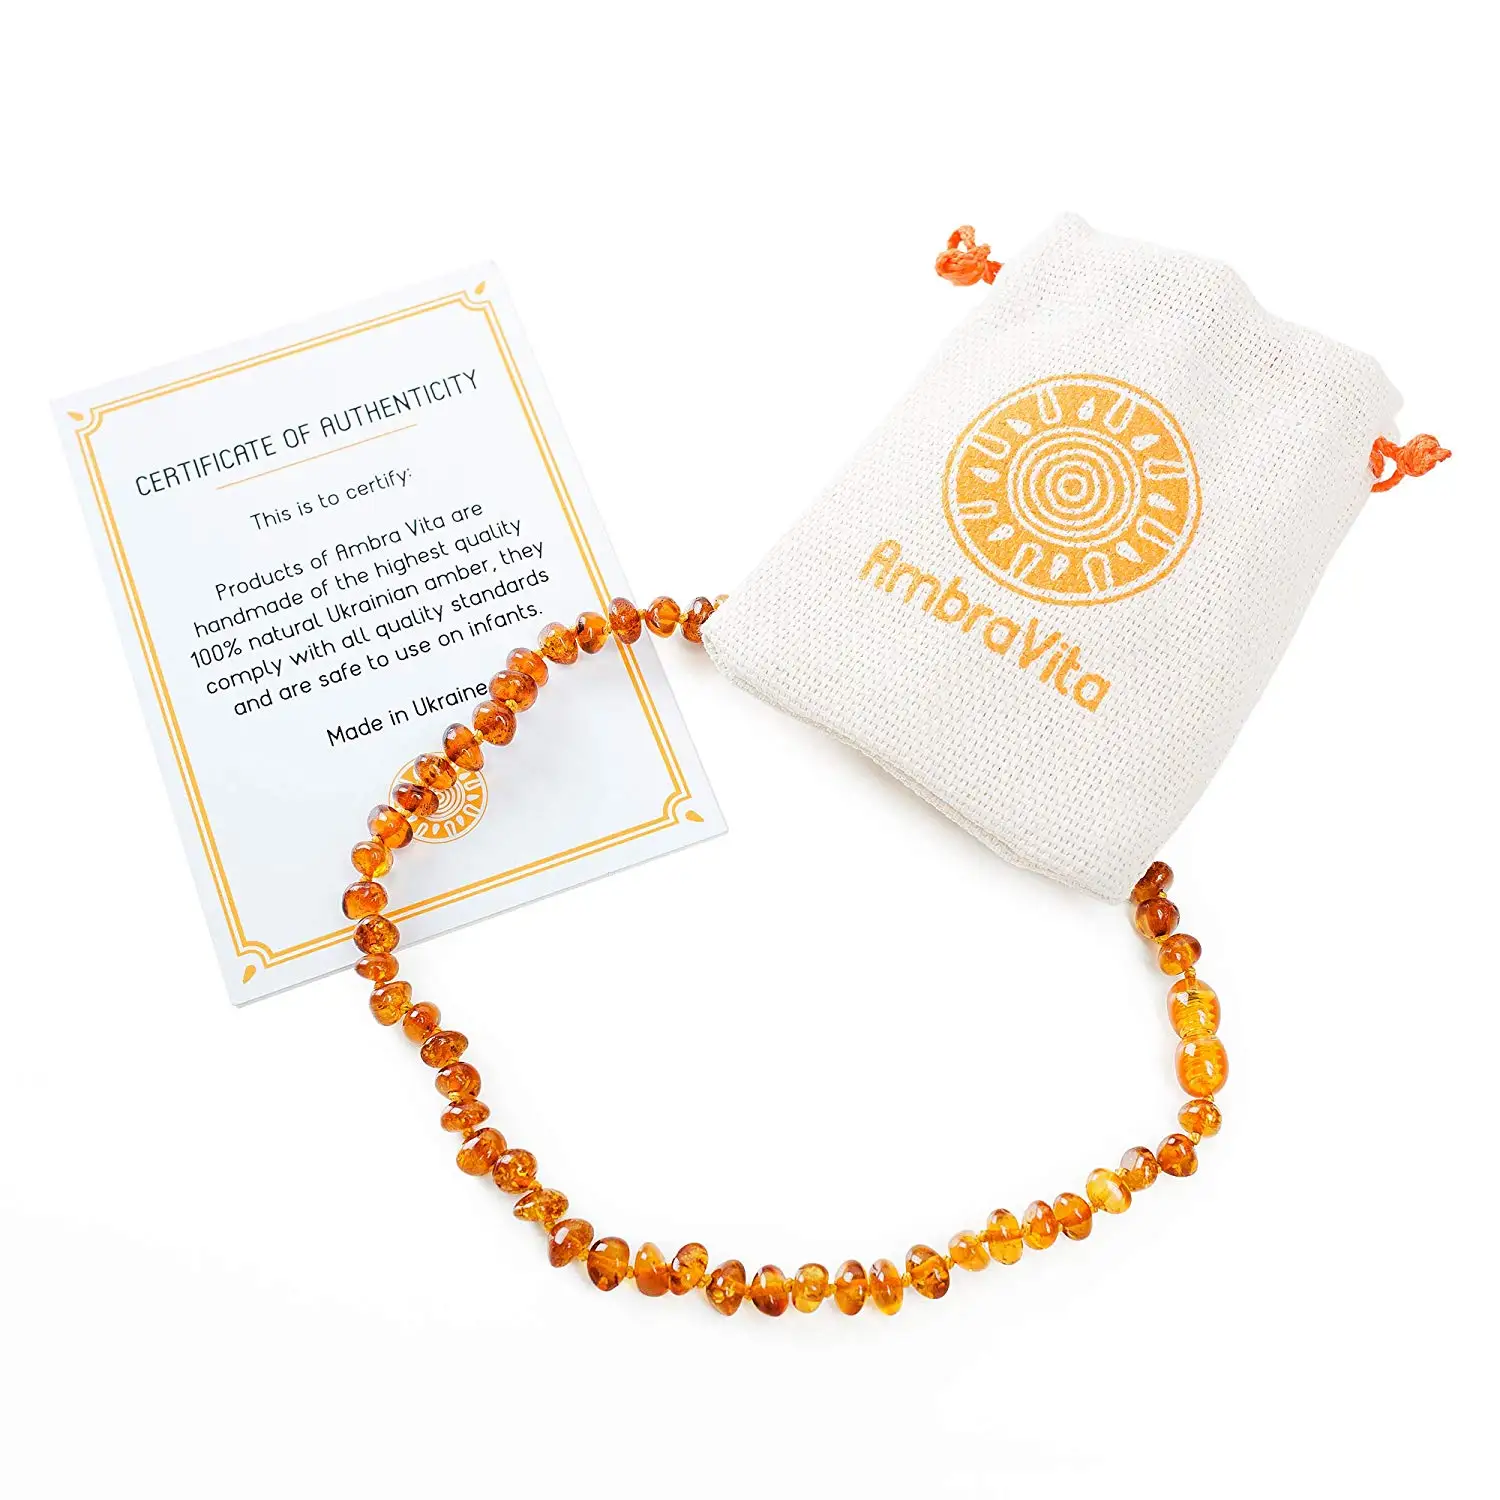 100 Usa Lab Tested Authentic Baltic Amber Baltic Amber Teething Necklace Flower Soothing Teething Pain Relief Handcrafted All Natural Unisex Honey Cherry Color 12 5 Inches Teethers Baby Toddler Toys - baby amber roblox